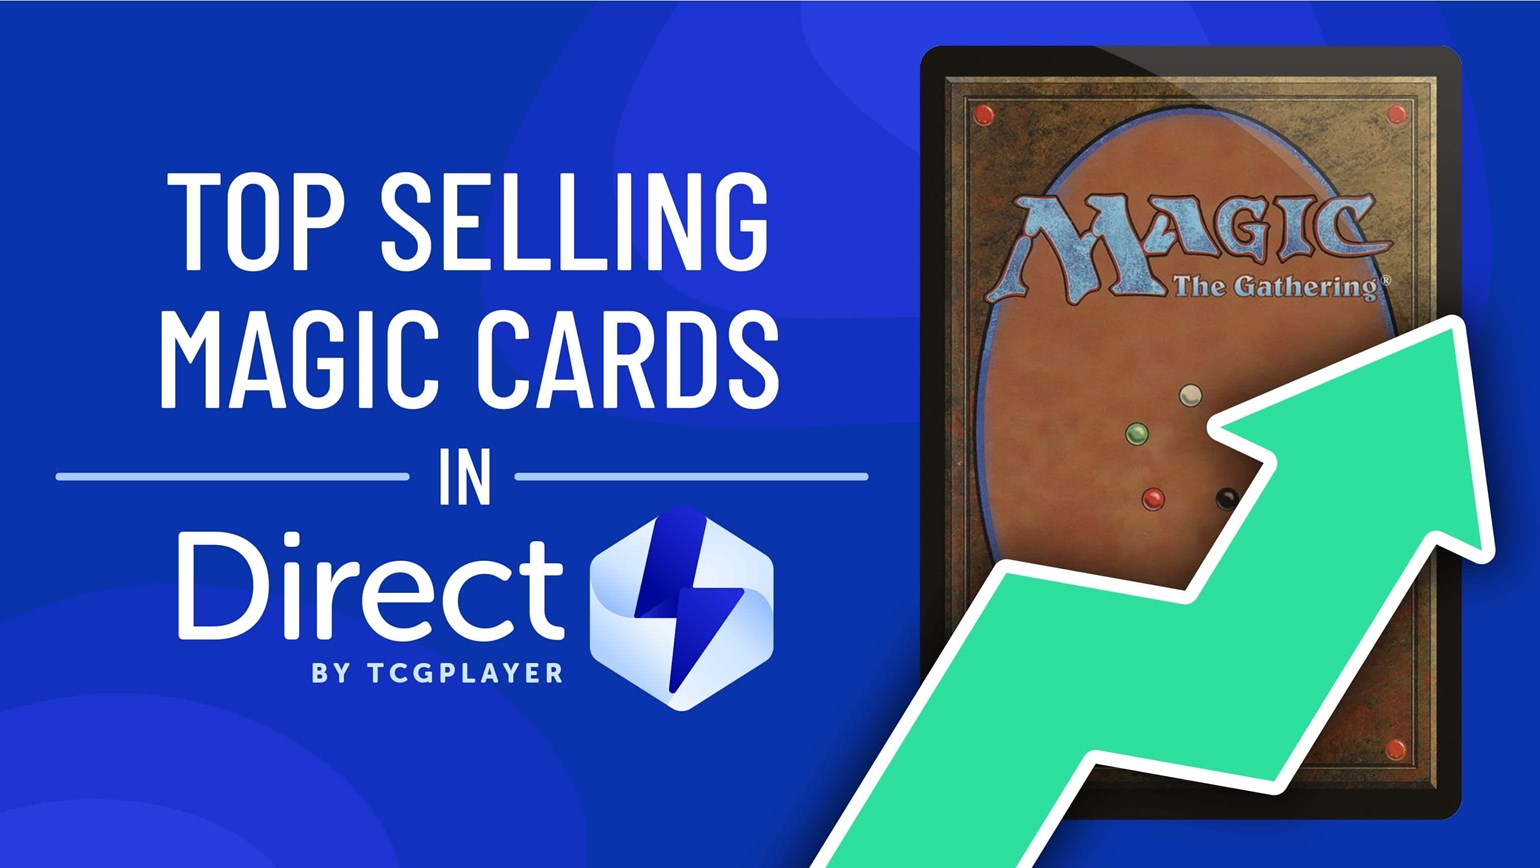 December Top Selling Magic: The Gathering Cards Under $25 in Direct by TCGplayer